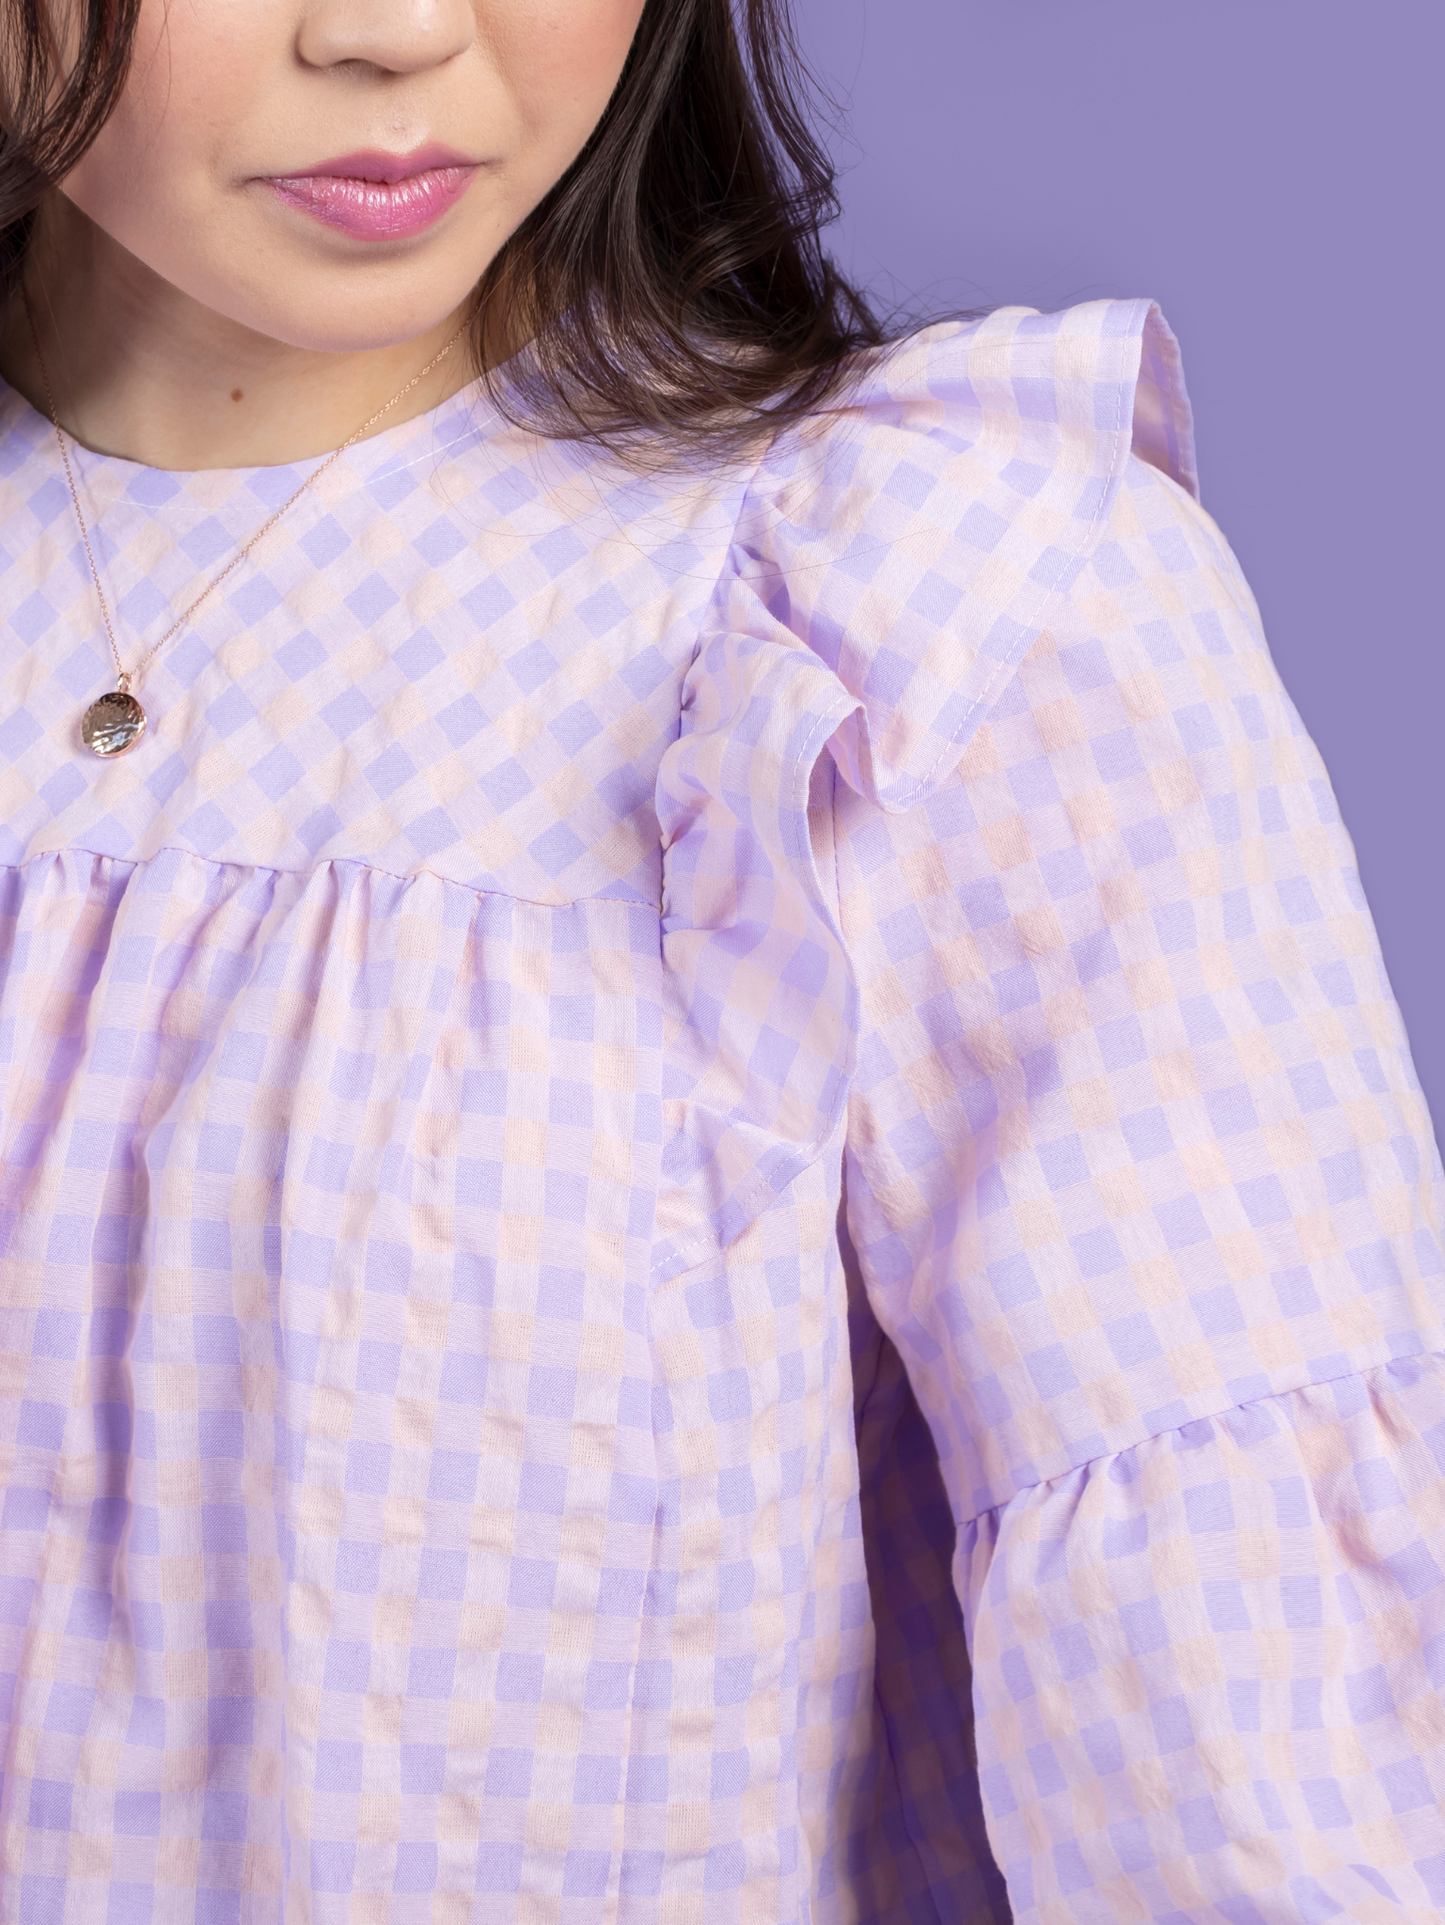 Tilly and the Buttons Marnie blouse and mini dress